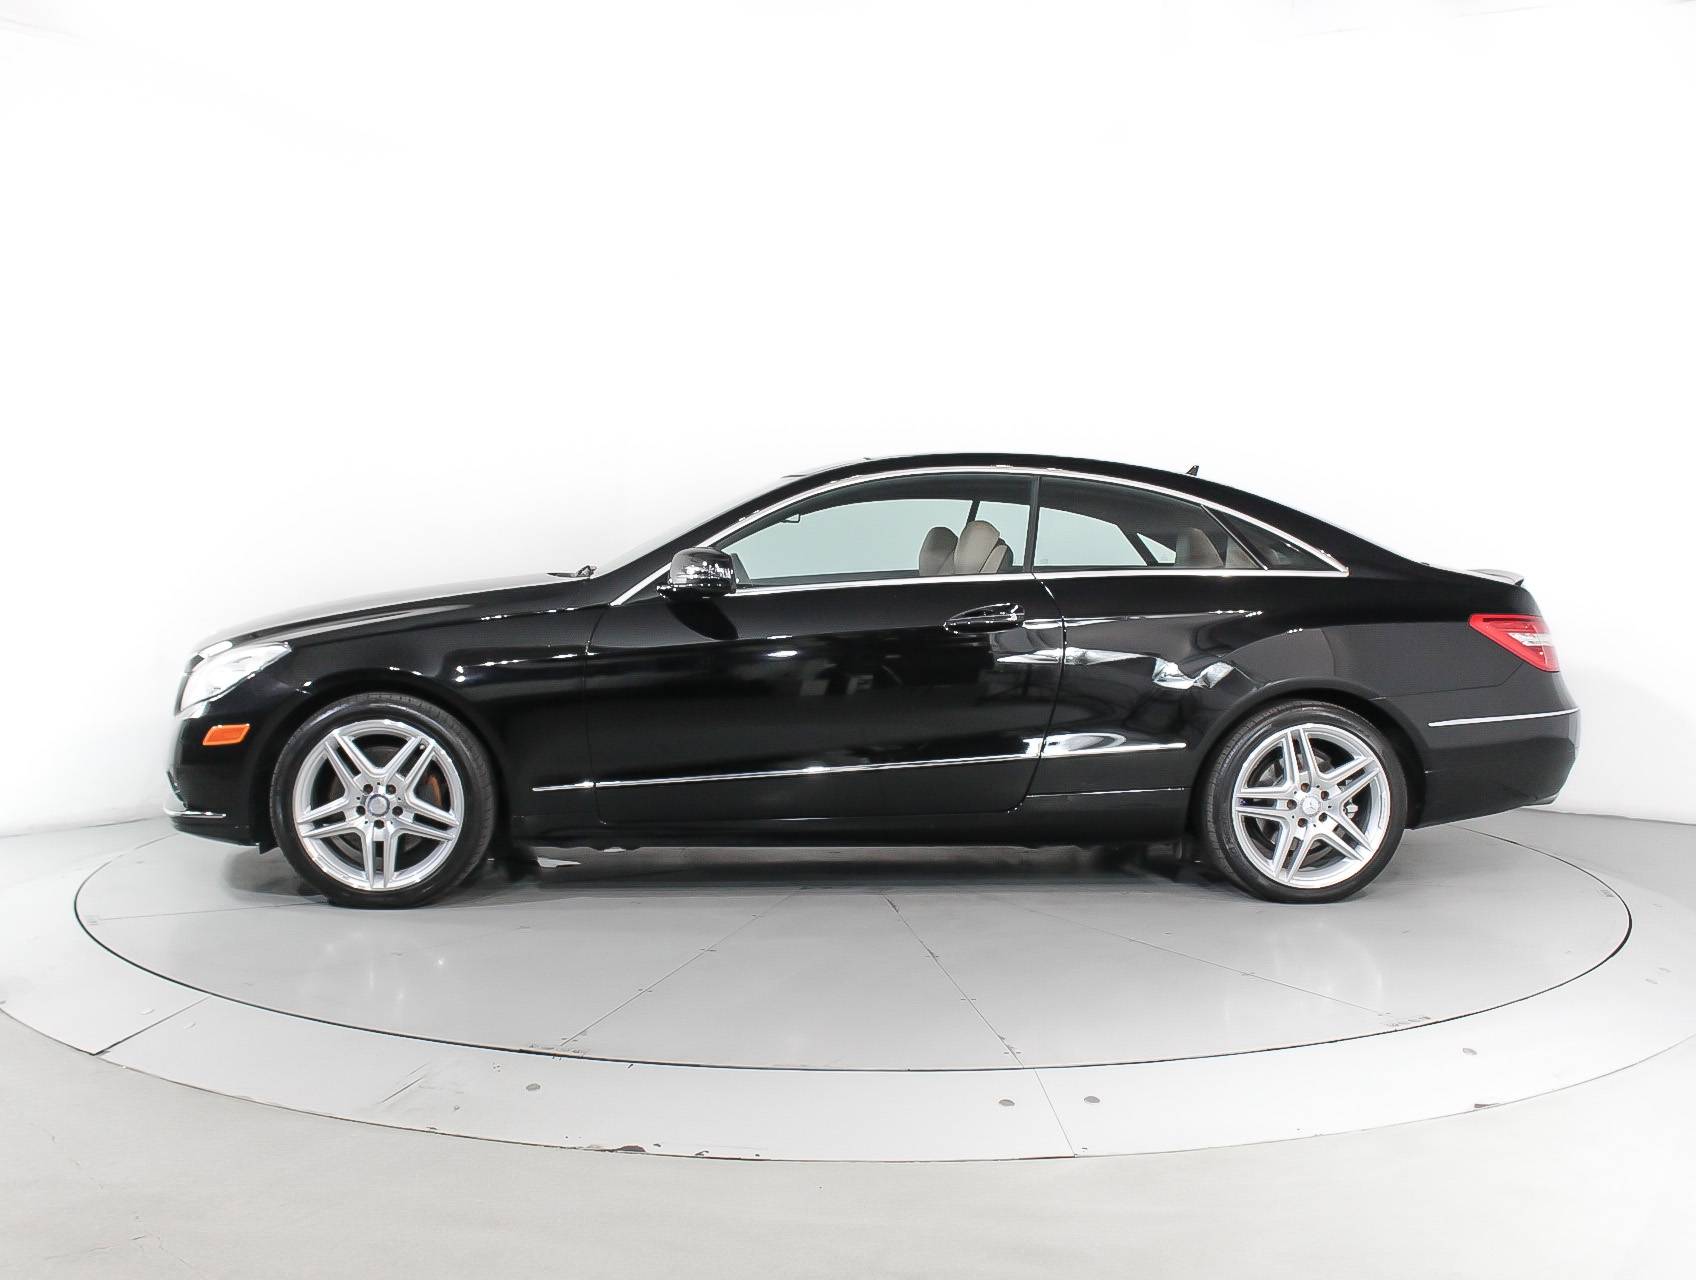 Used 13 Mercedes Benz E Class 50 Coupe For Sale In Hollywood Fl Florida Fine Cars